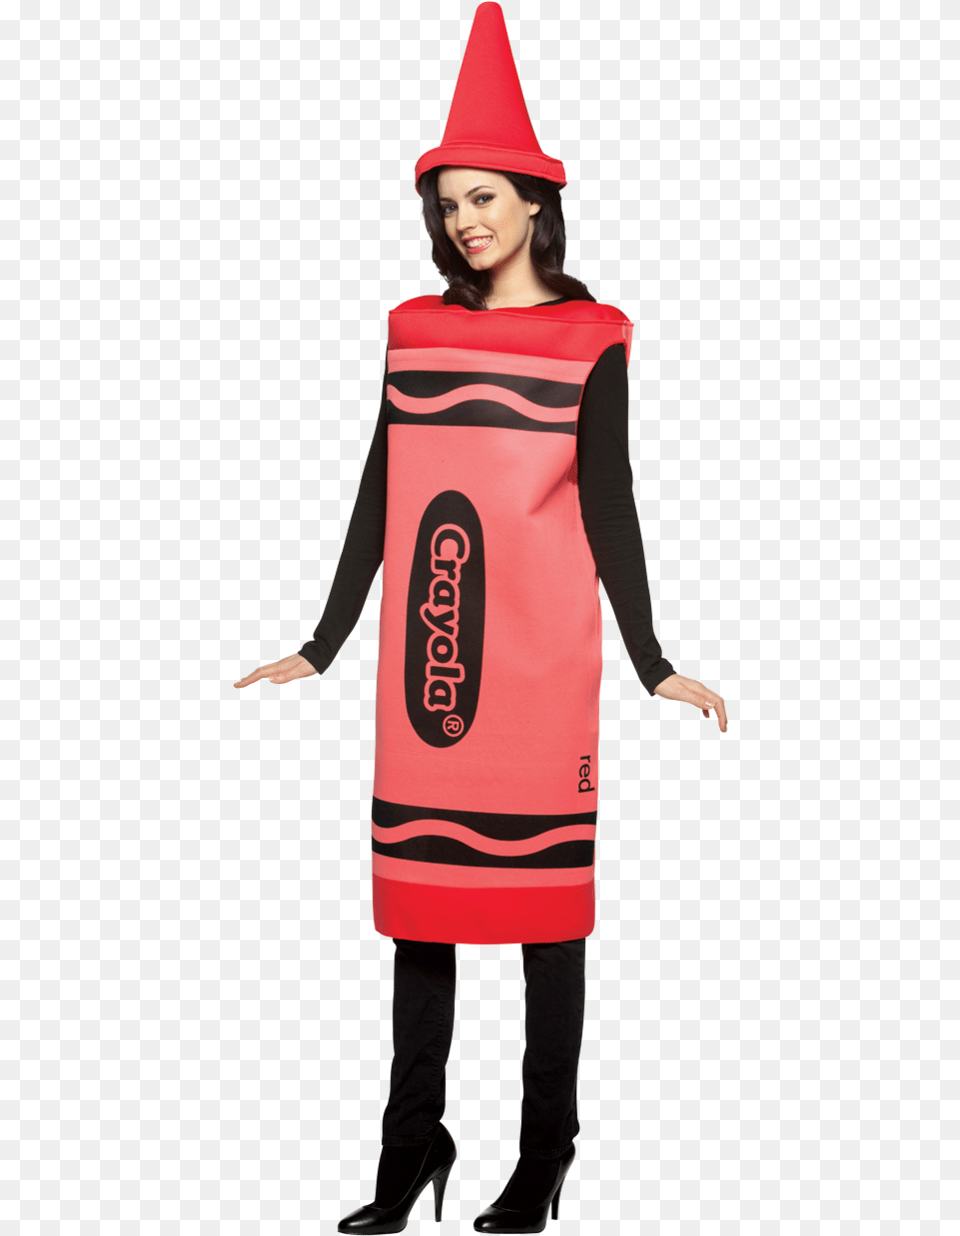 Womens Red Crayola Crayon Costume Crayon Costume Adults, Clothing, Person, Adult, Woman Png